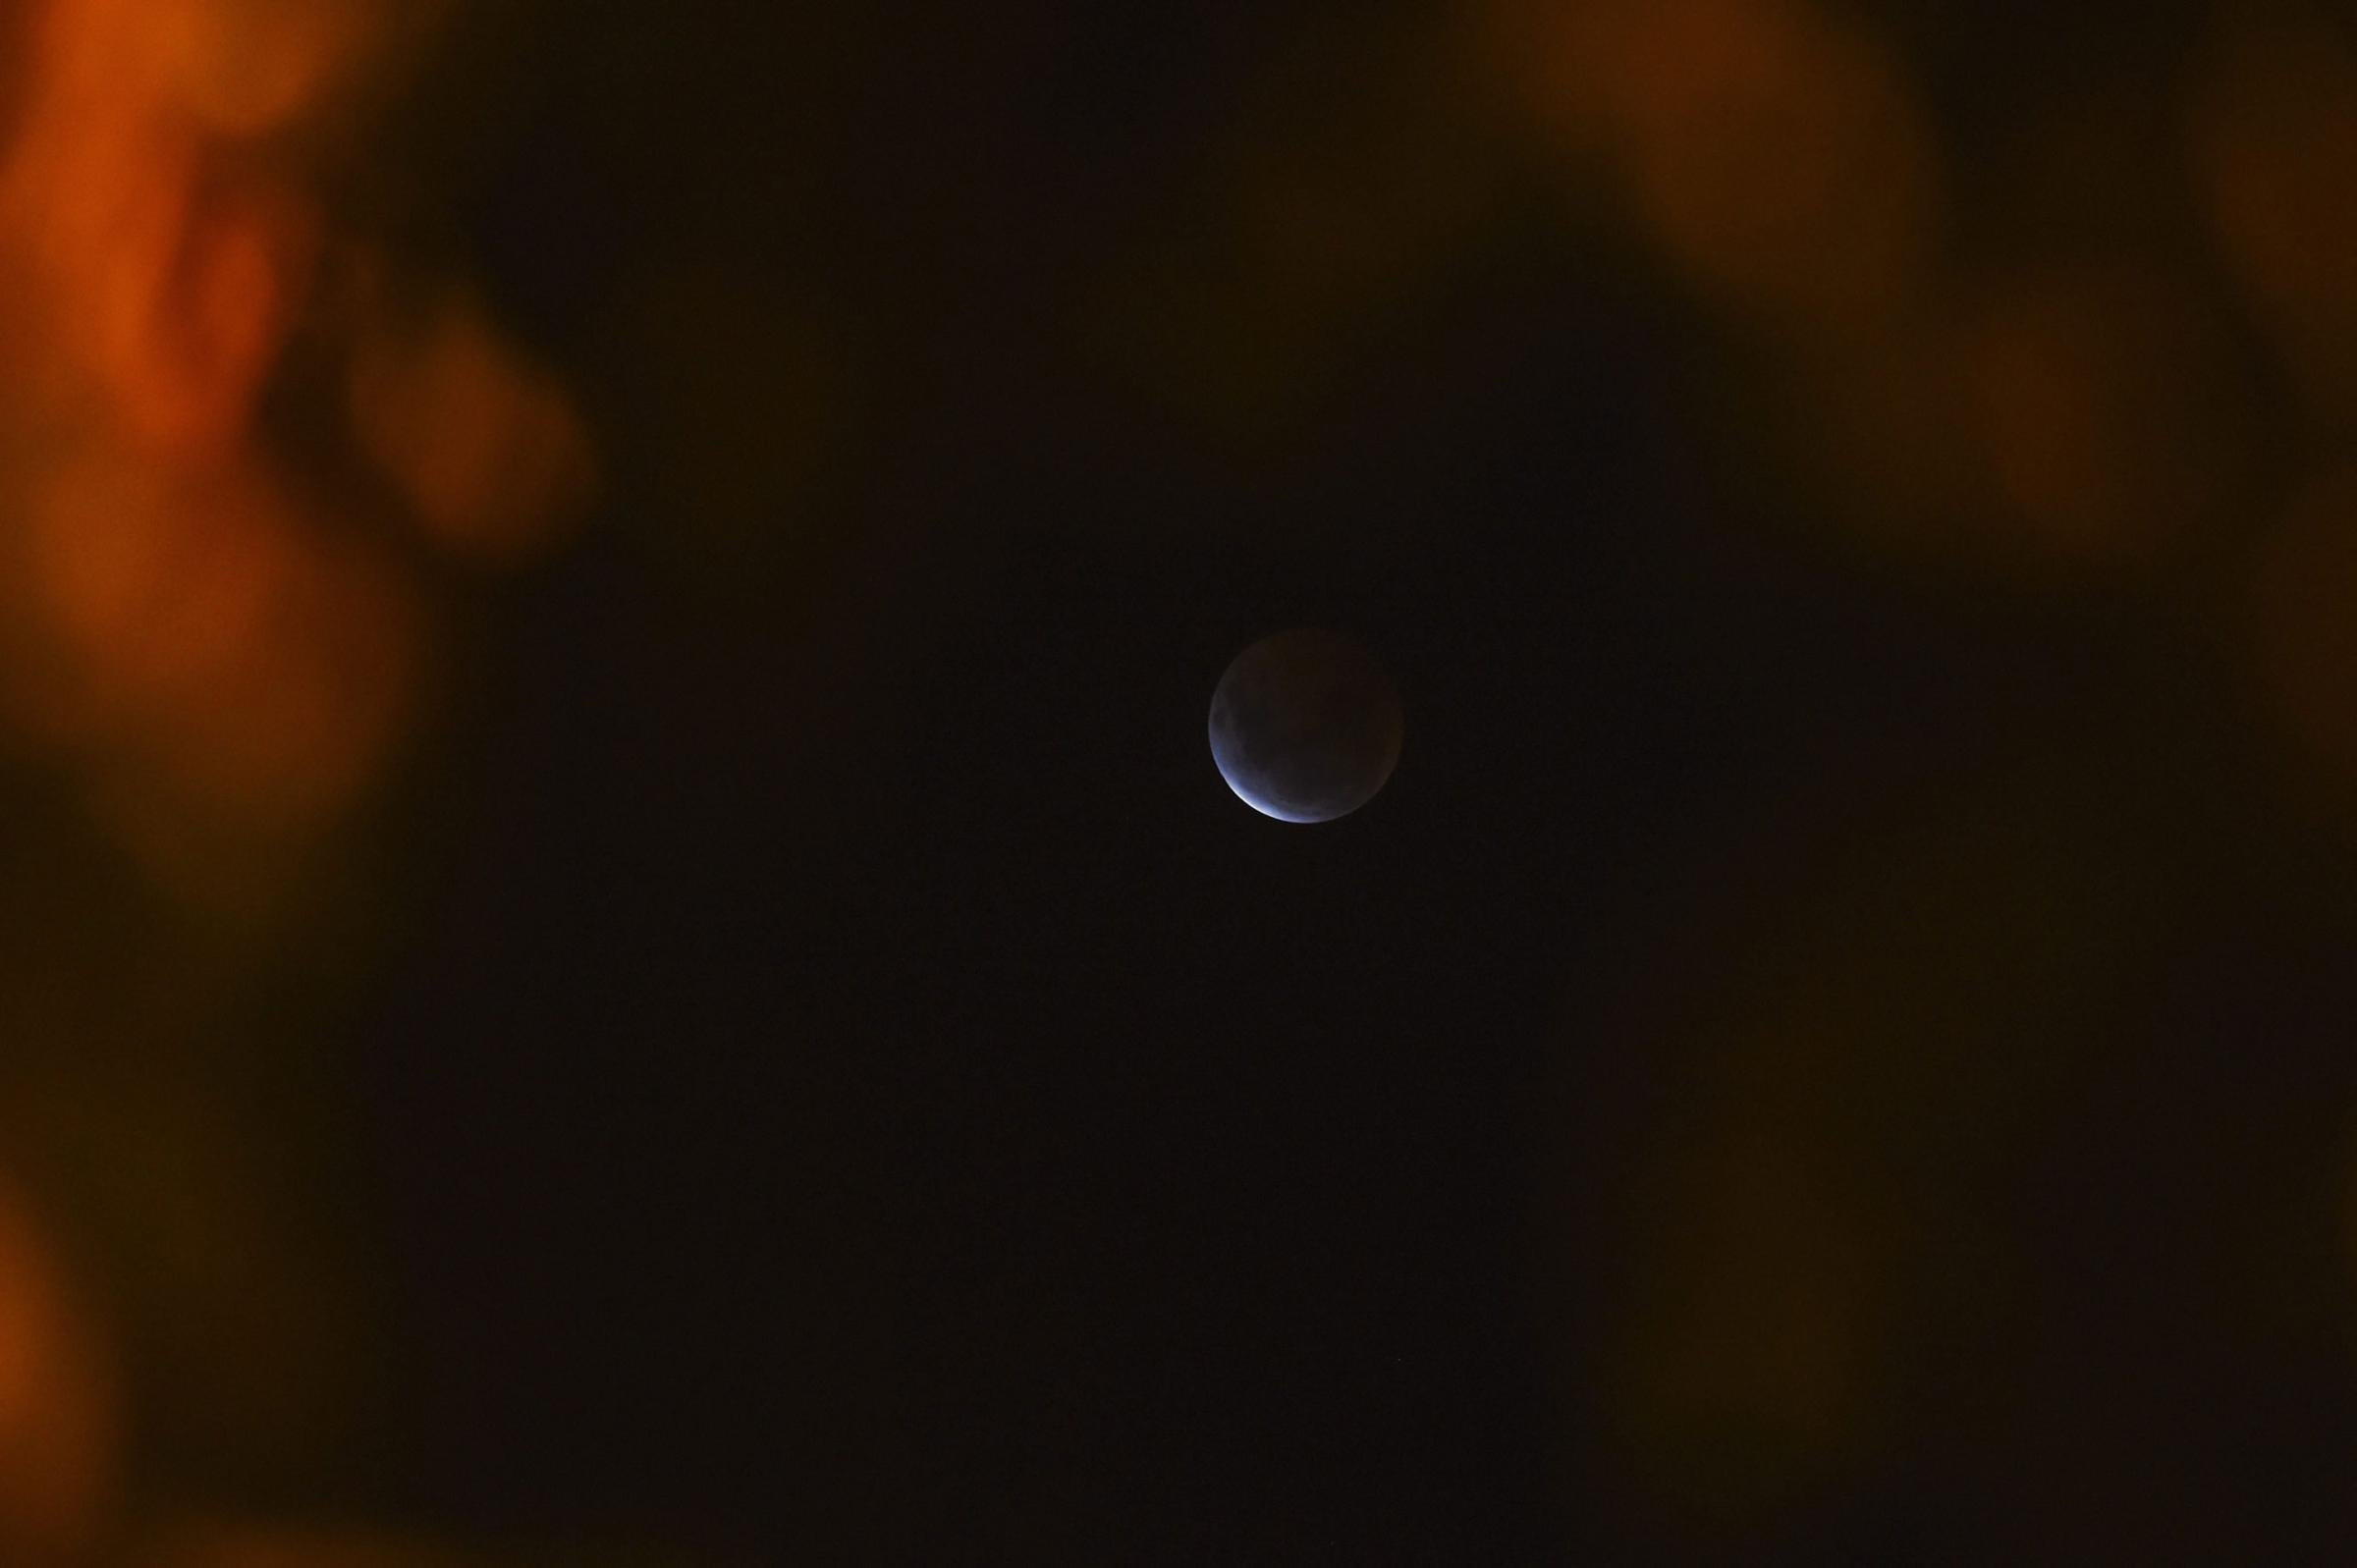 The beginning of the total lunar eclipse seen from Canberra, Australia, on April 4, 2015.